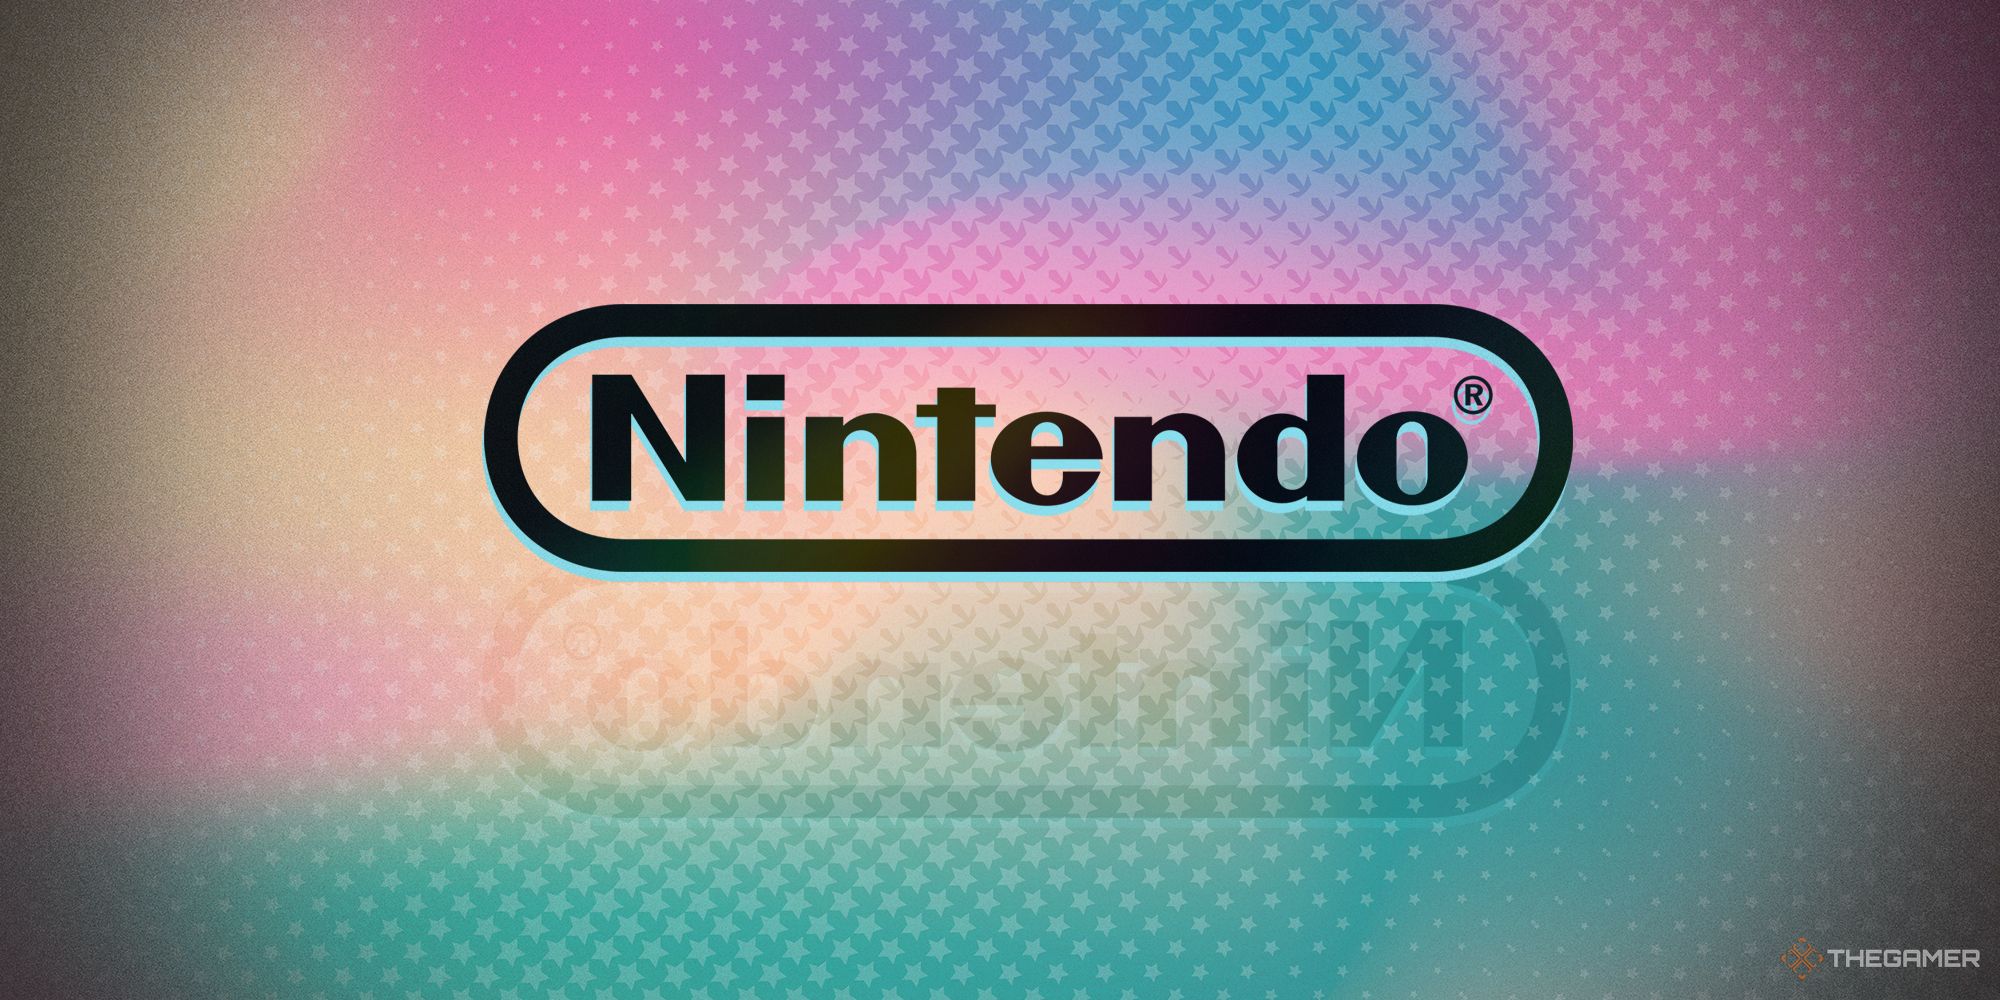 NEWS Nintendo logo over pink and blue stars background with logo reflected underneath